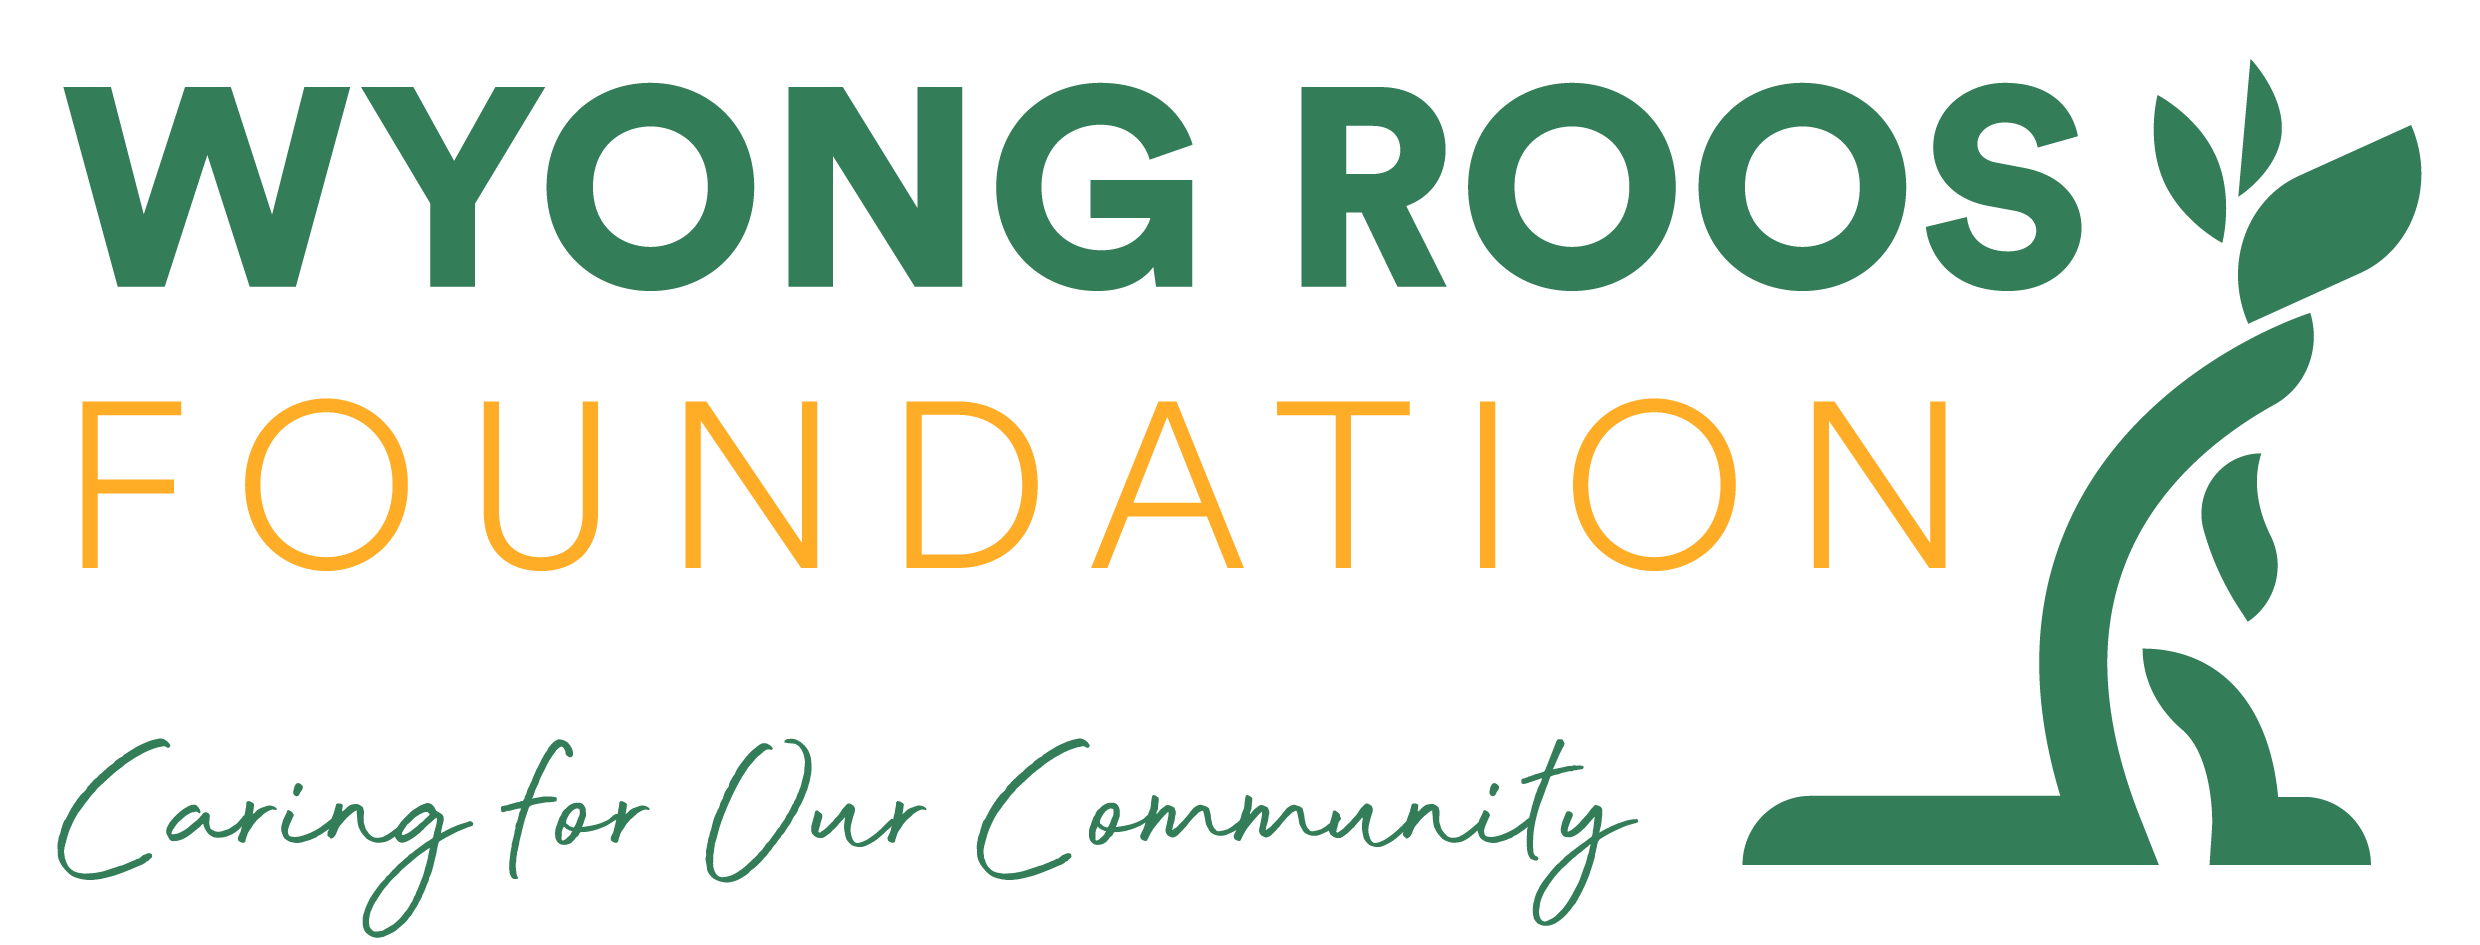 Wyong Roos Foundation